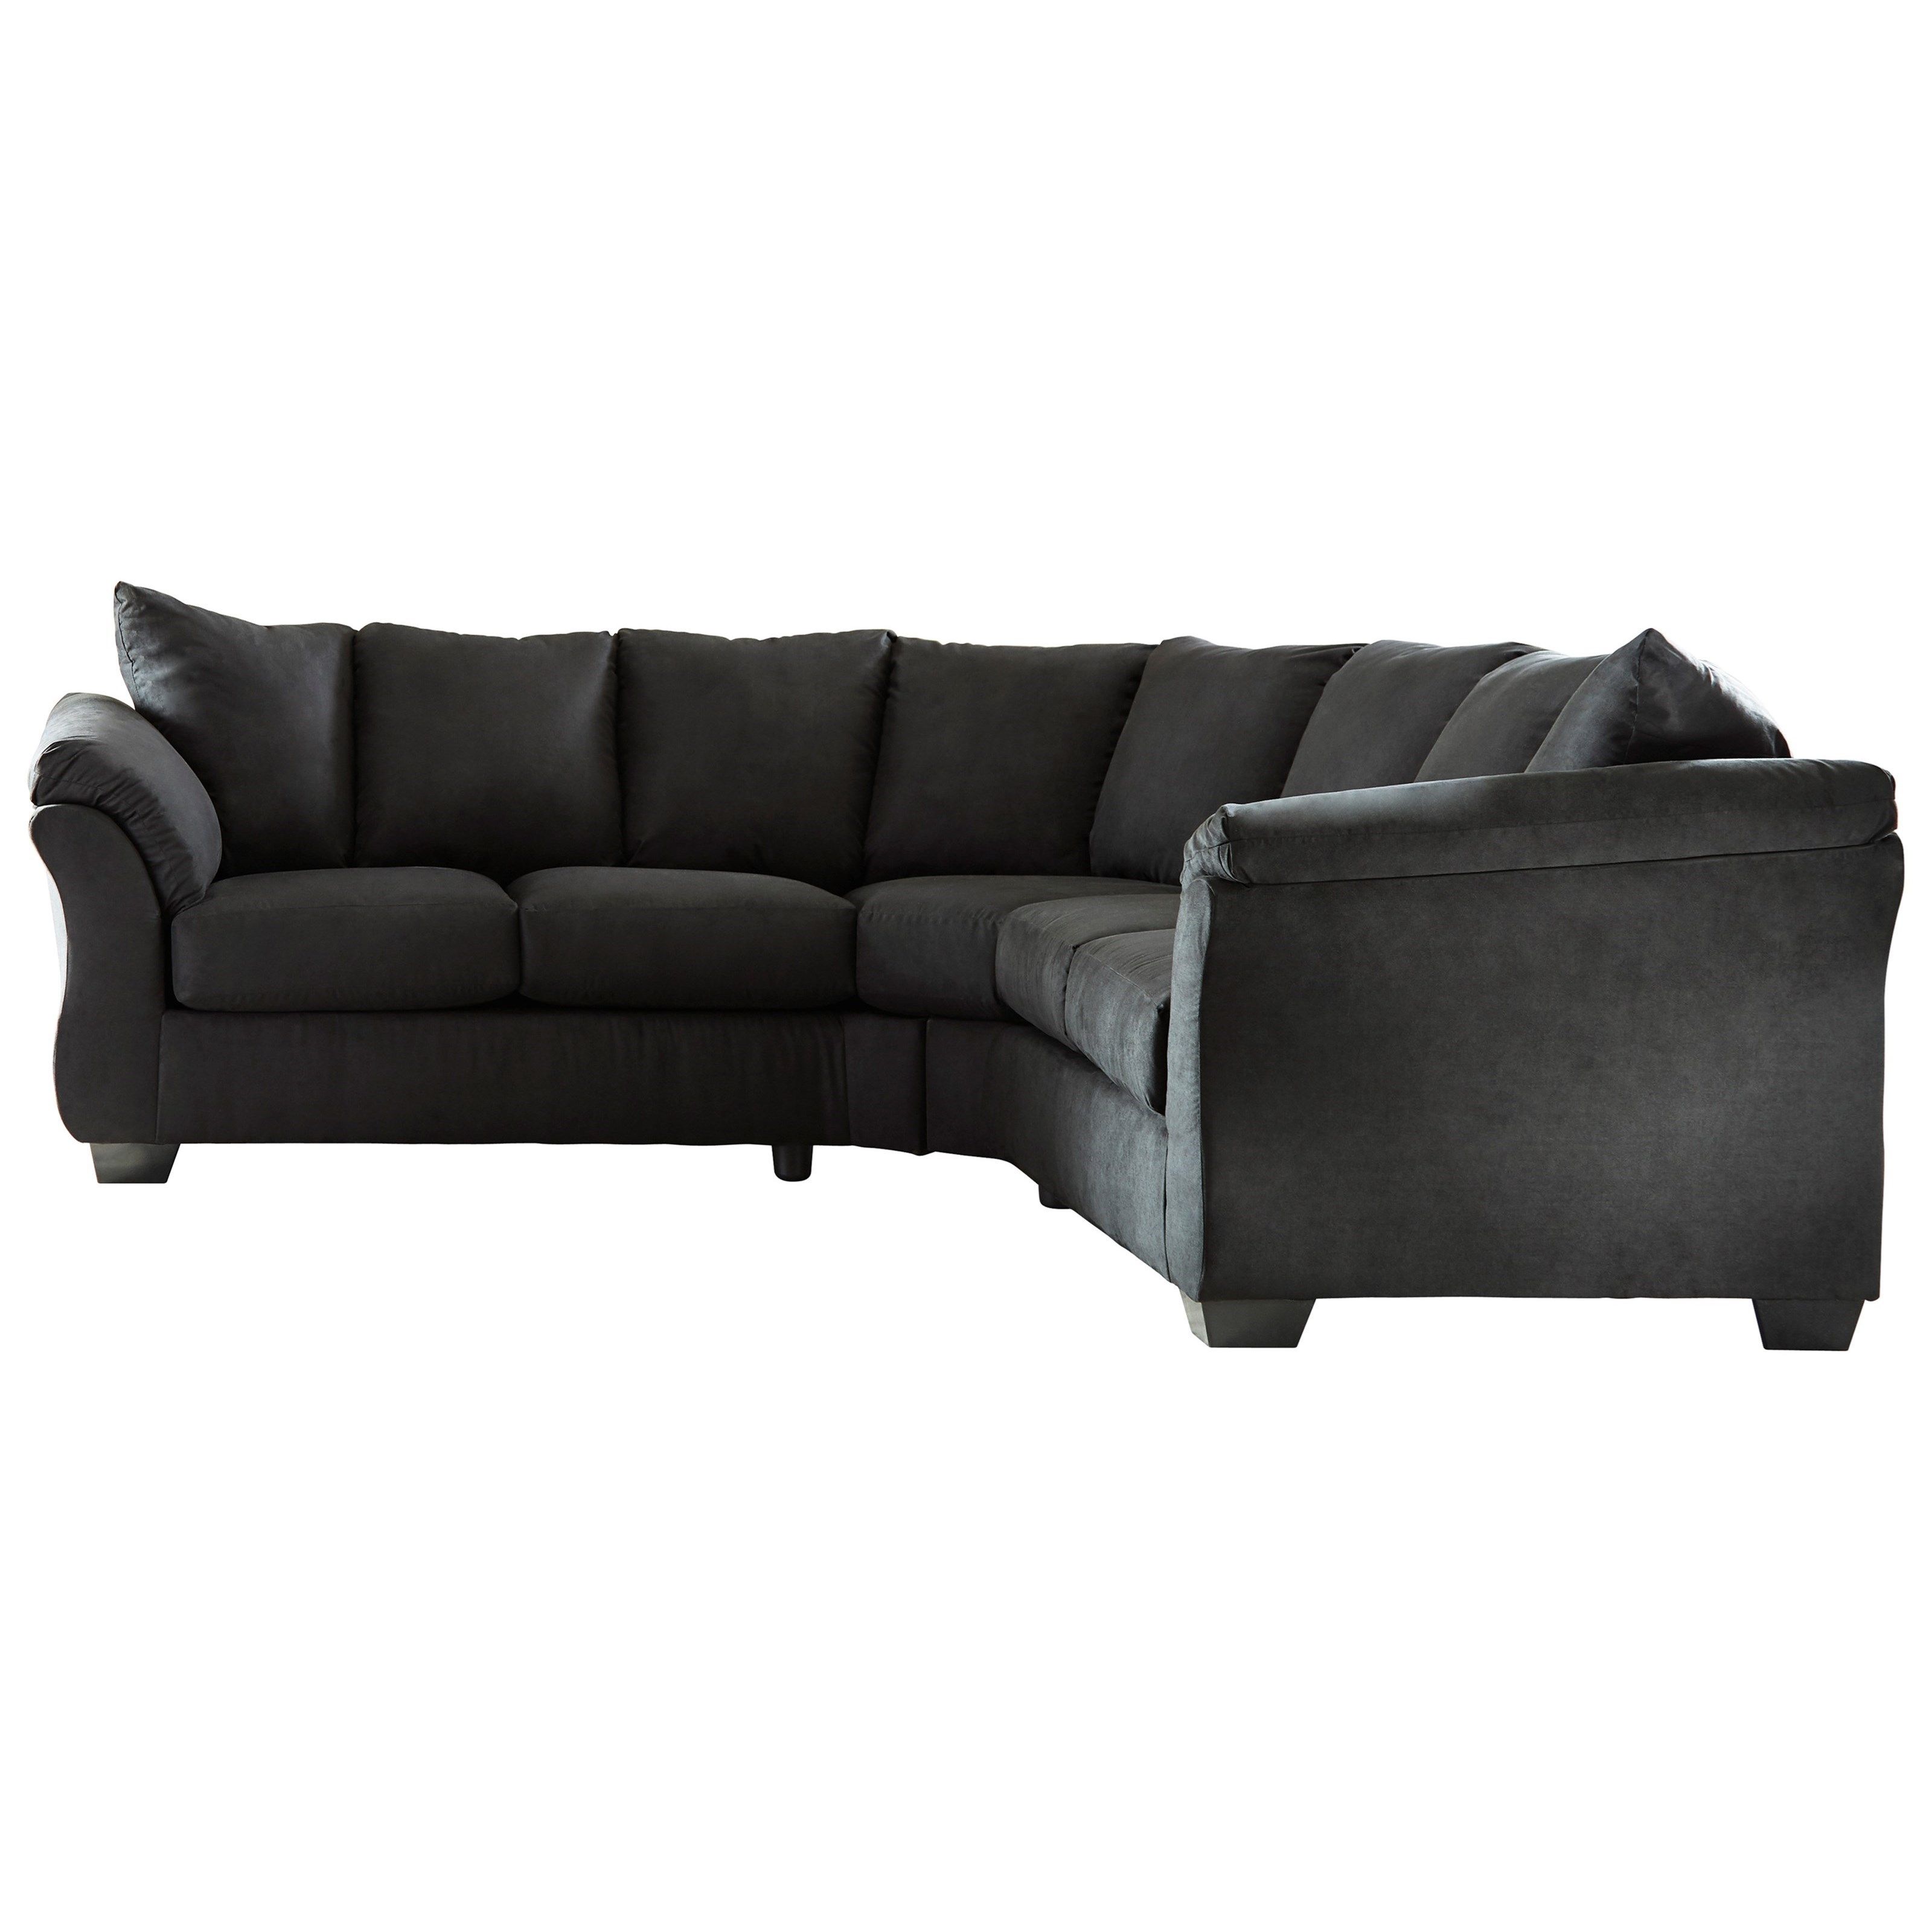 Signature Designashley Darcy – Black Contemporary Sectional Sofa In Black Sectional Sofas (View 9 of 15)